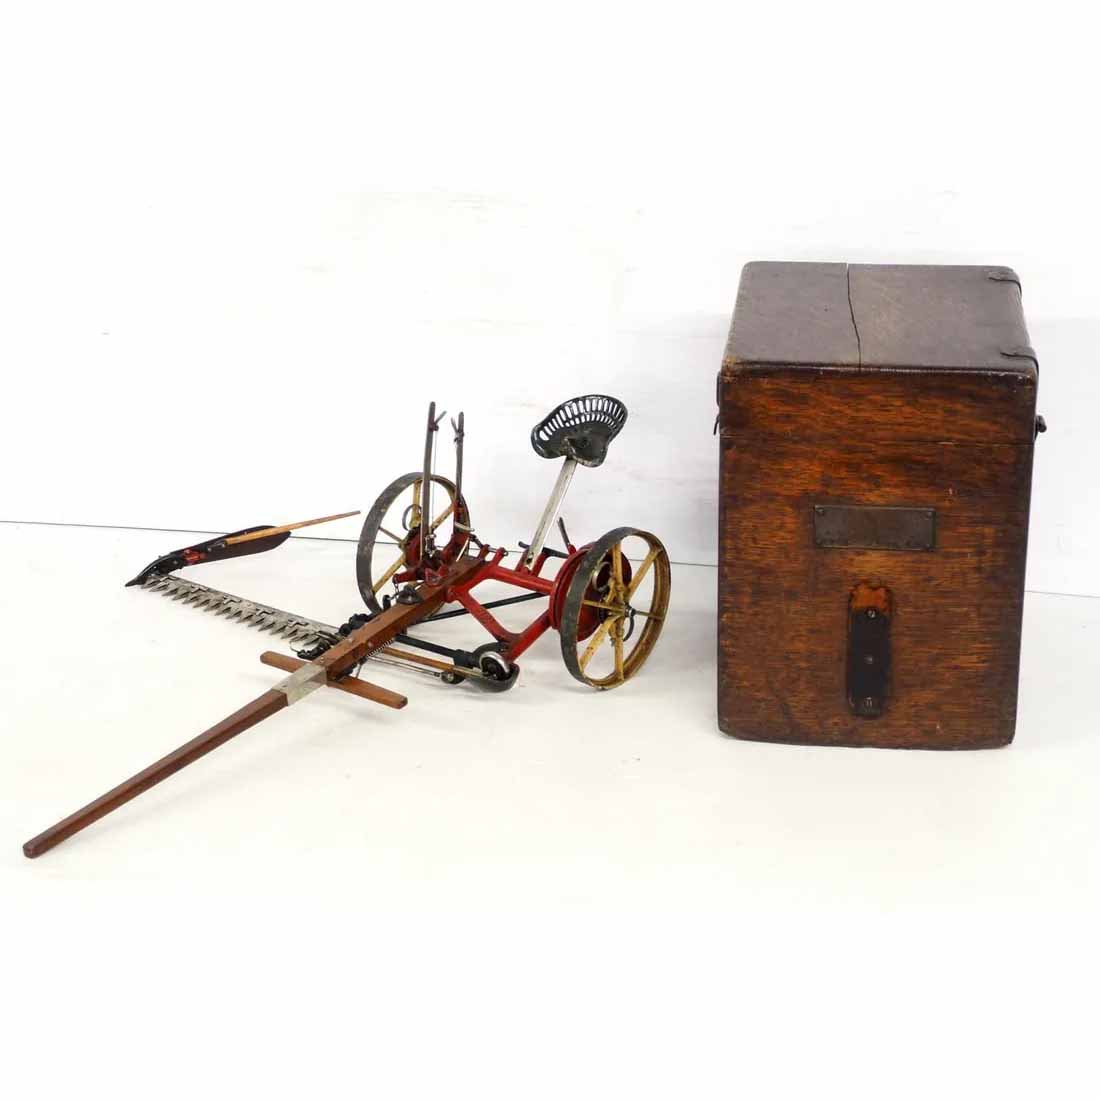 Salesman's sample horse-drawn sickle mower, which sold for $14,000 ($16,800 with buyer’s premium) at Chupp.